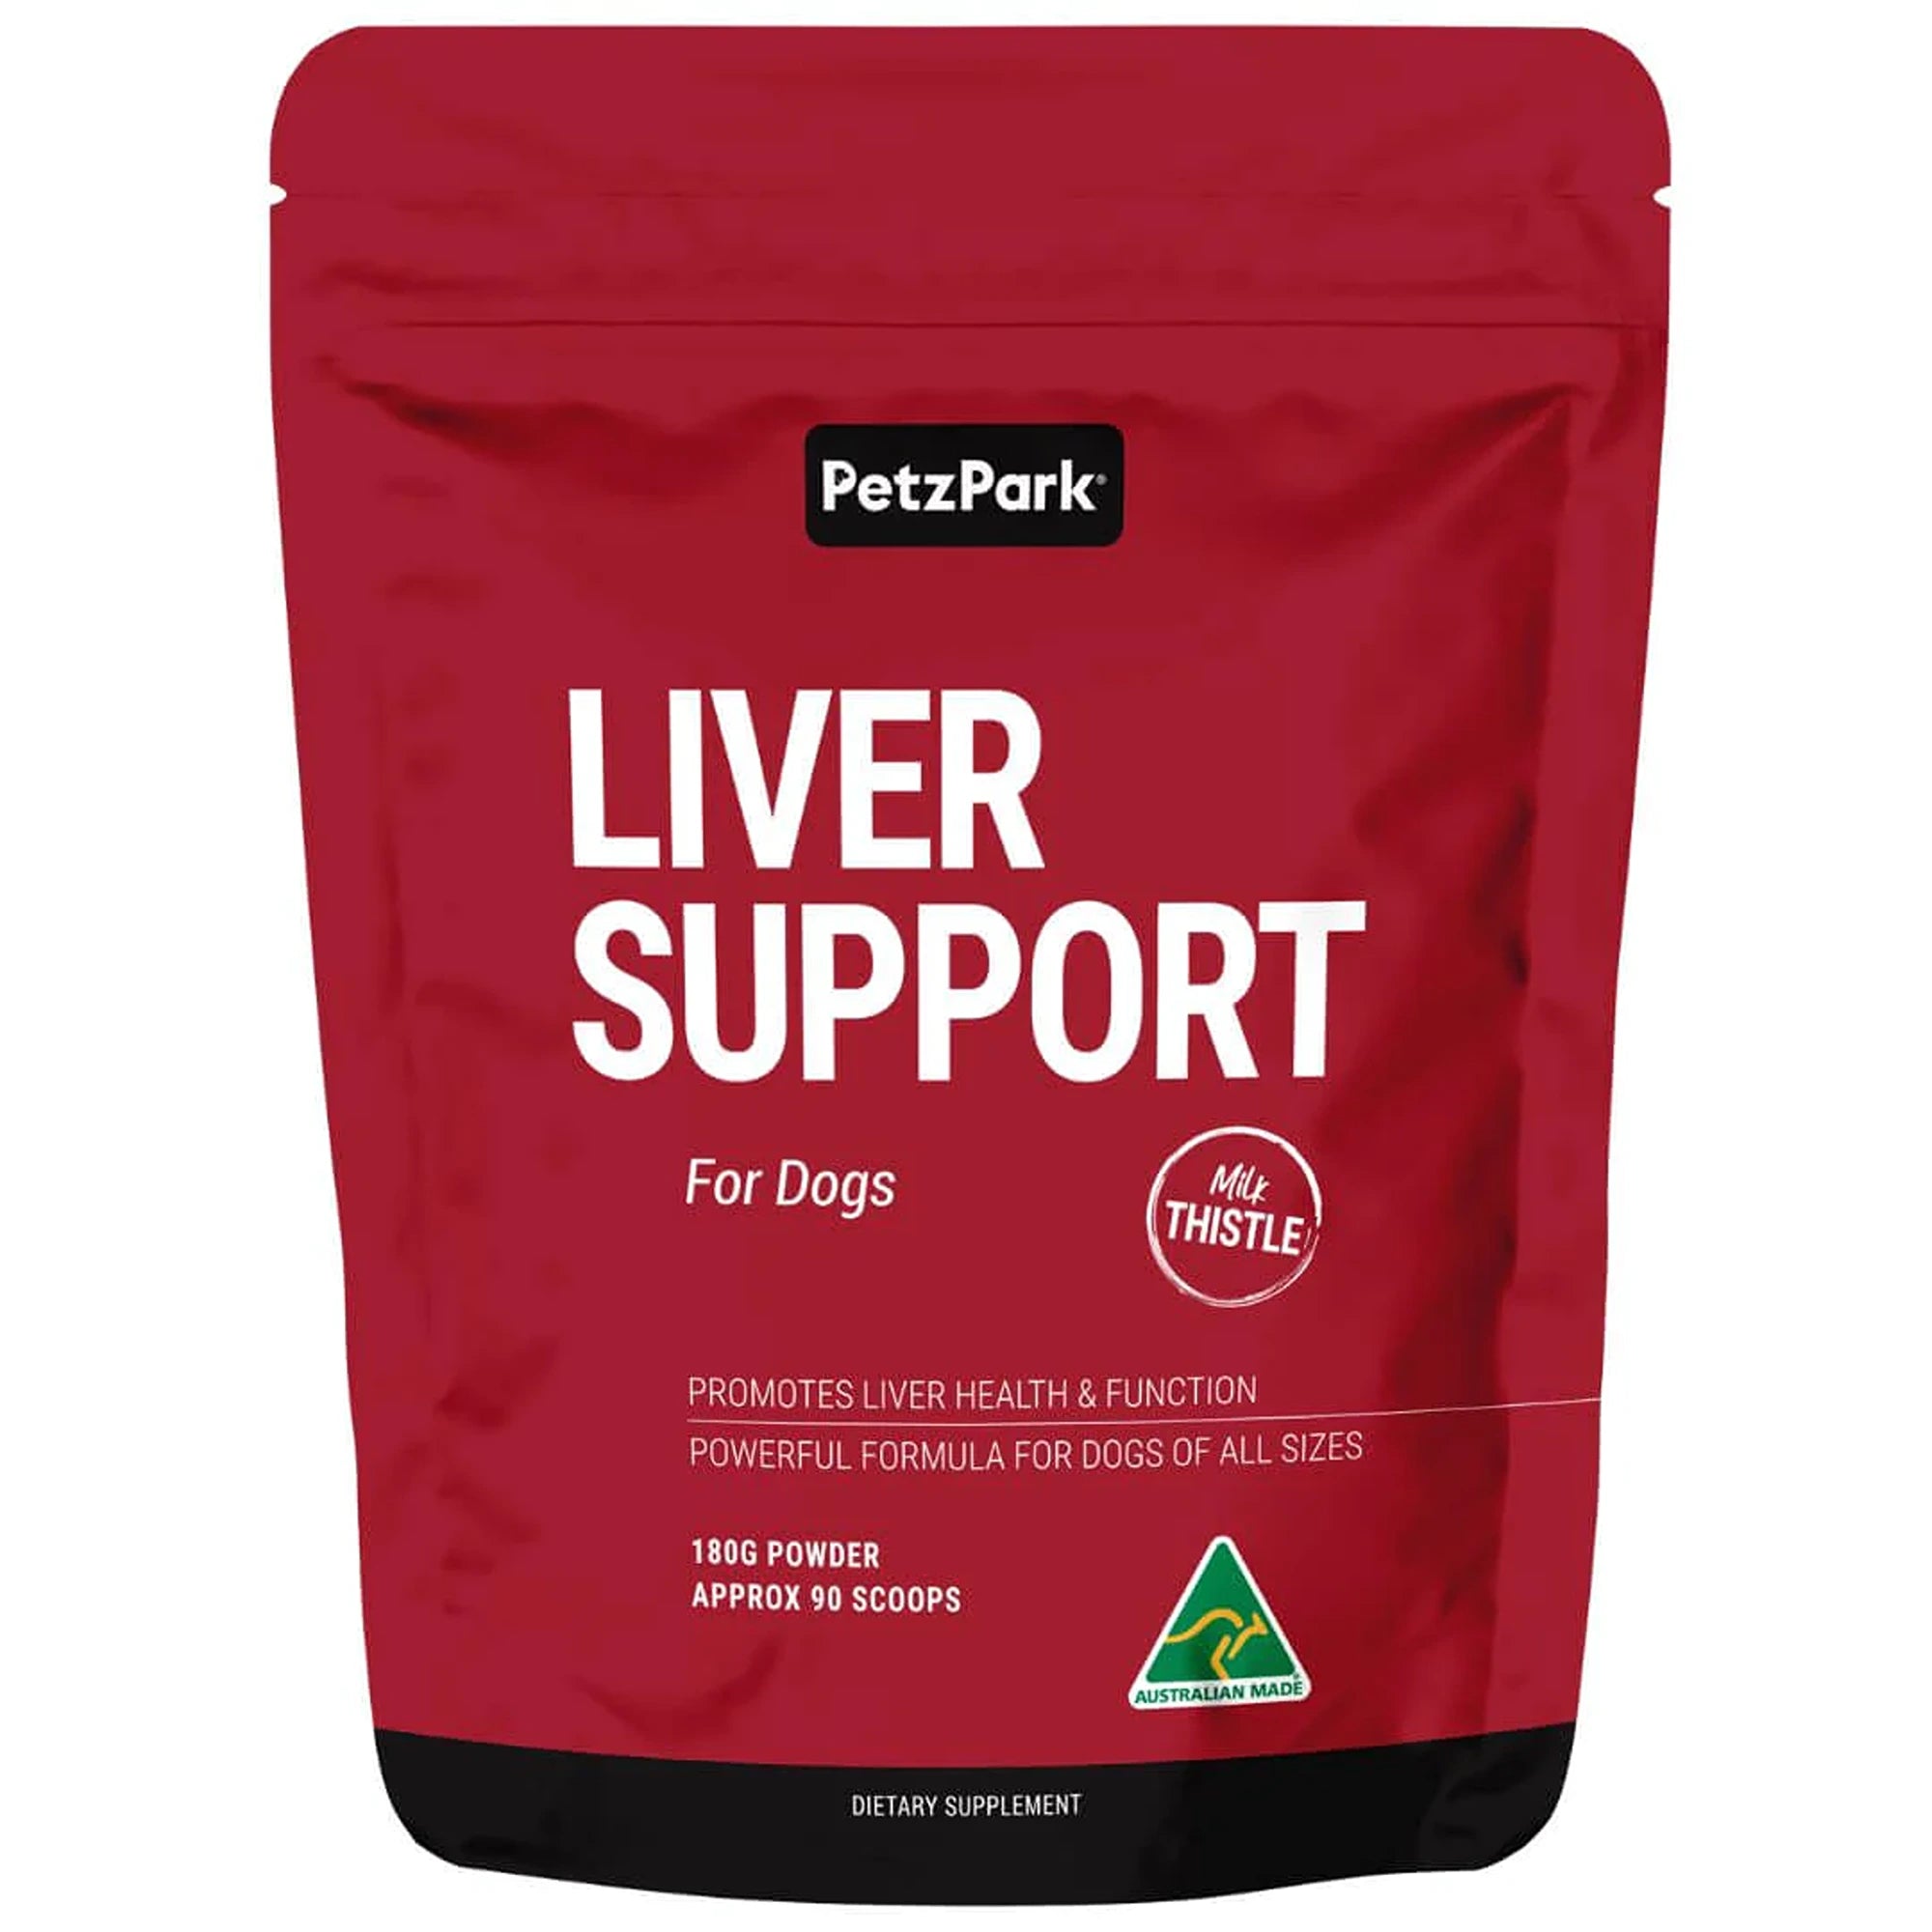 Petz Park Liver Support for Dogs 90 Scoops